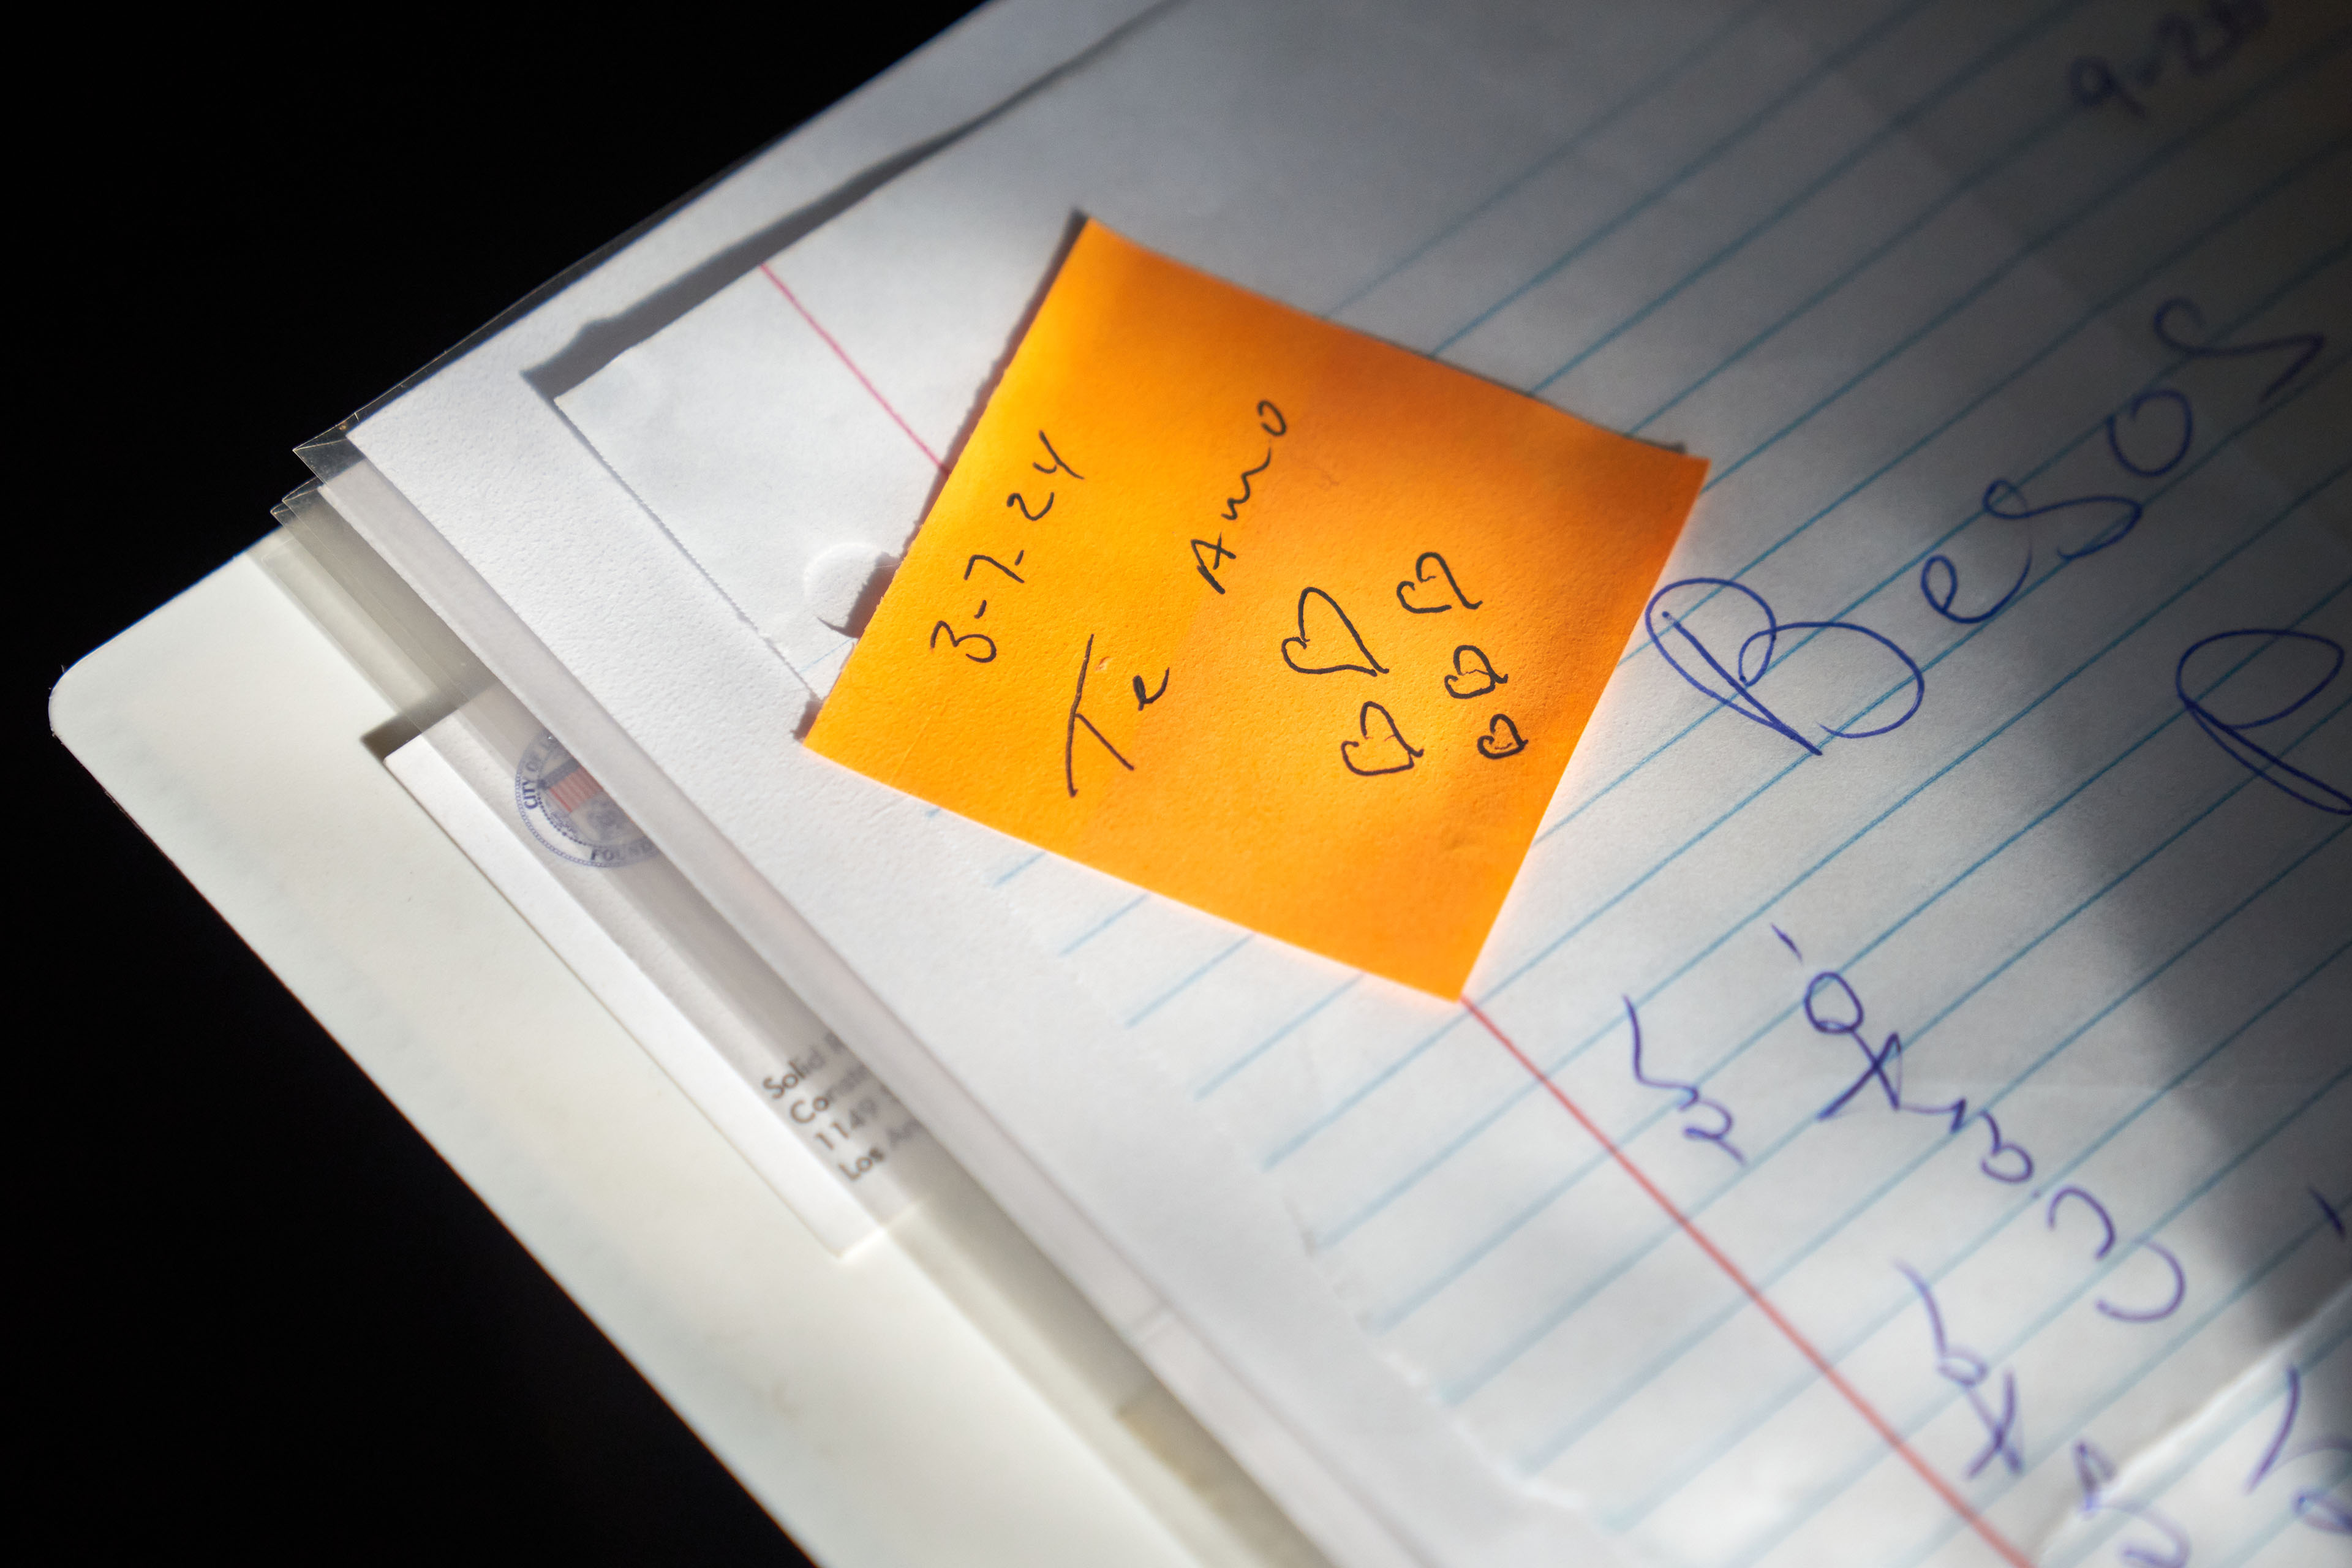 An up-close photograph of a sticky note in a notebook that says, "3-7-24 / Te Amo" with hand-drawn hearts underneath the text.